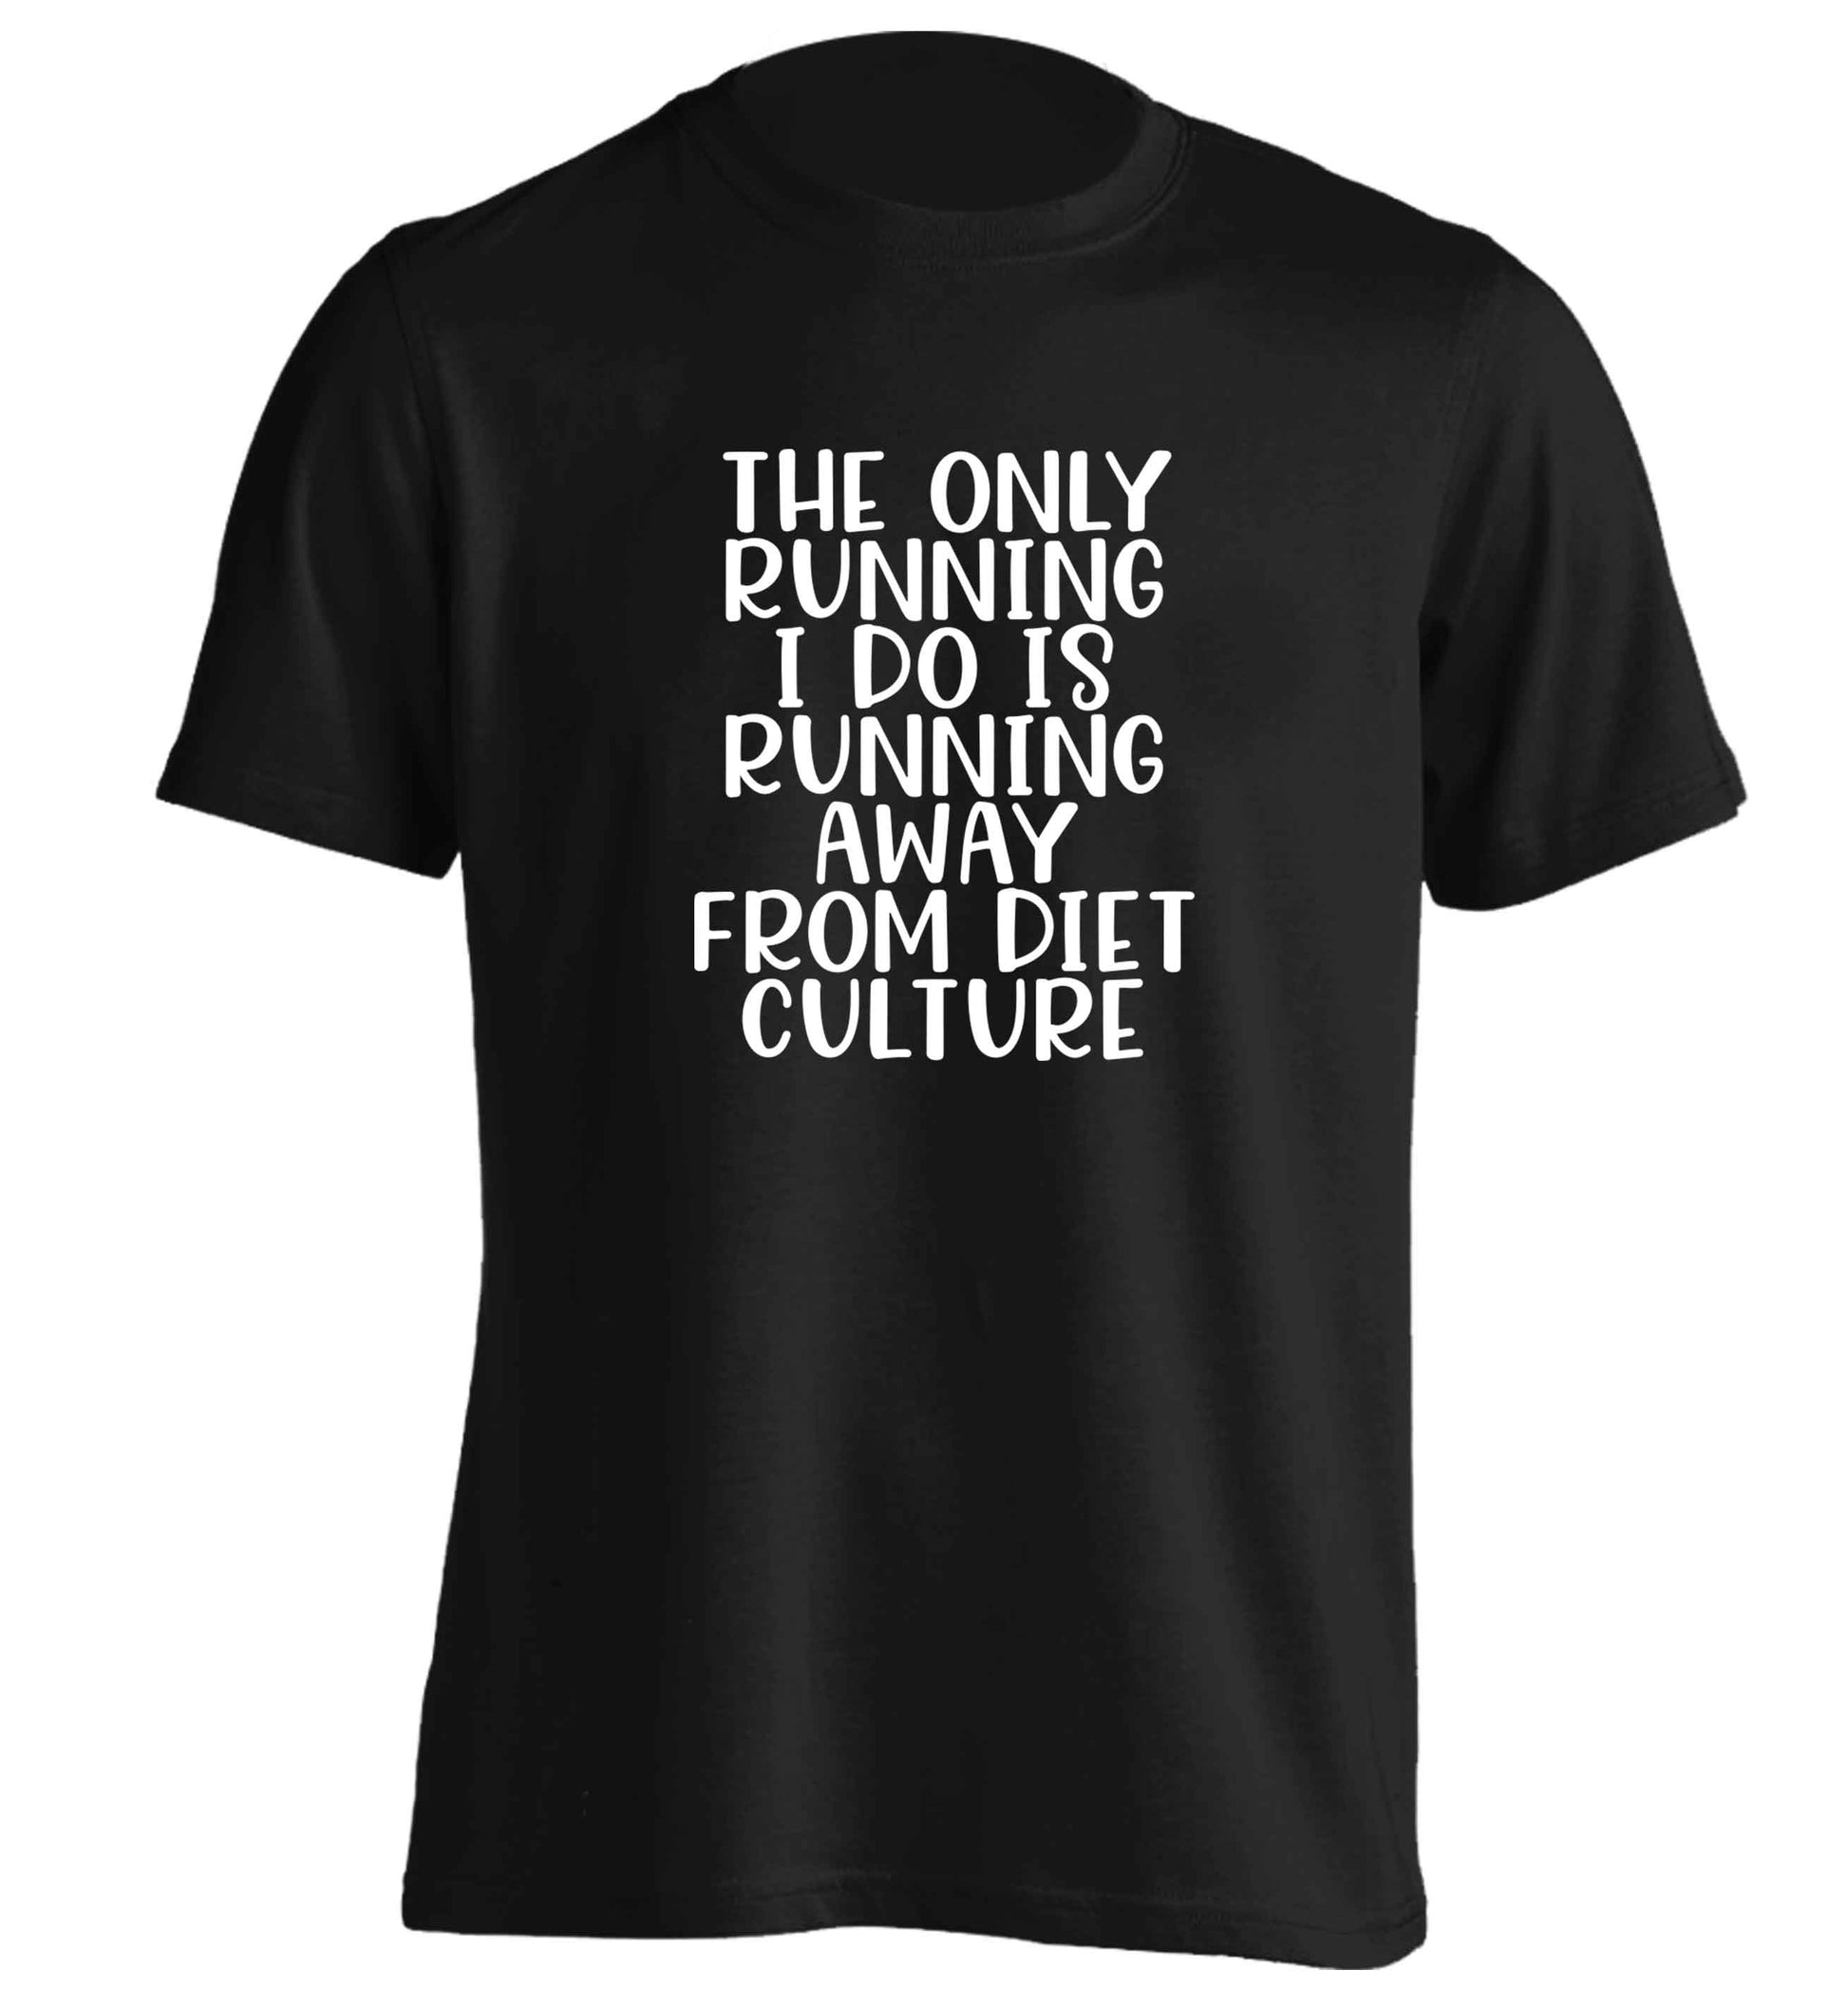 The only running I do is running away from diet culture adults unisex black Tshirt 2XL